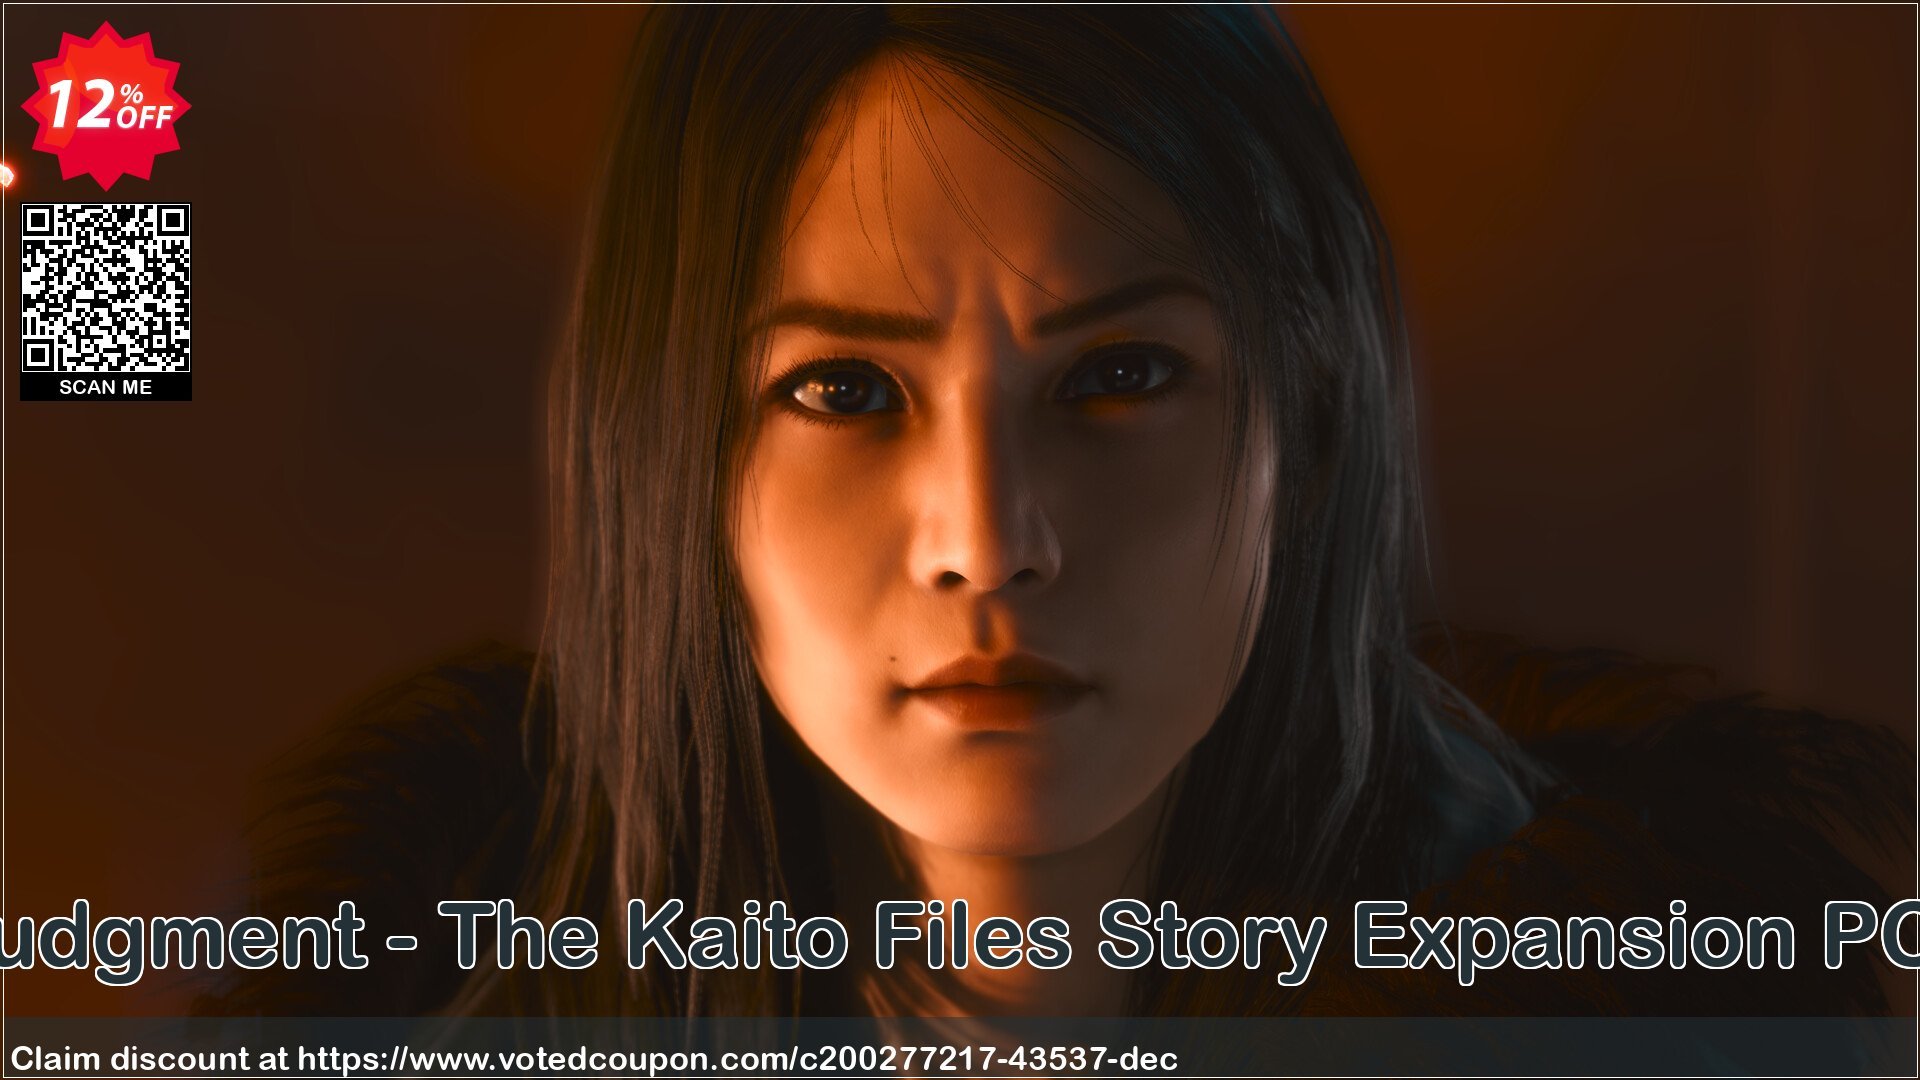 Lost Judgment - The Kaito Files Story Expansion PC - DLC Coupon Code May 2024, 12% OFF - VotedCoupon